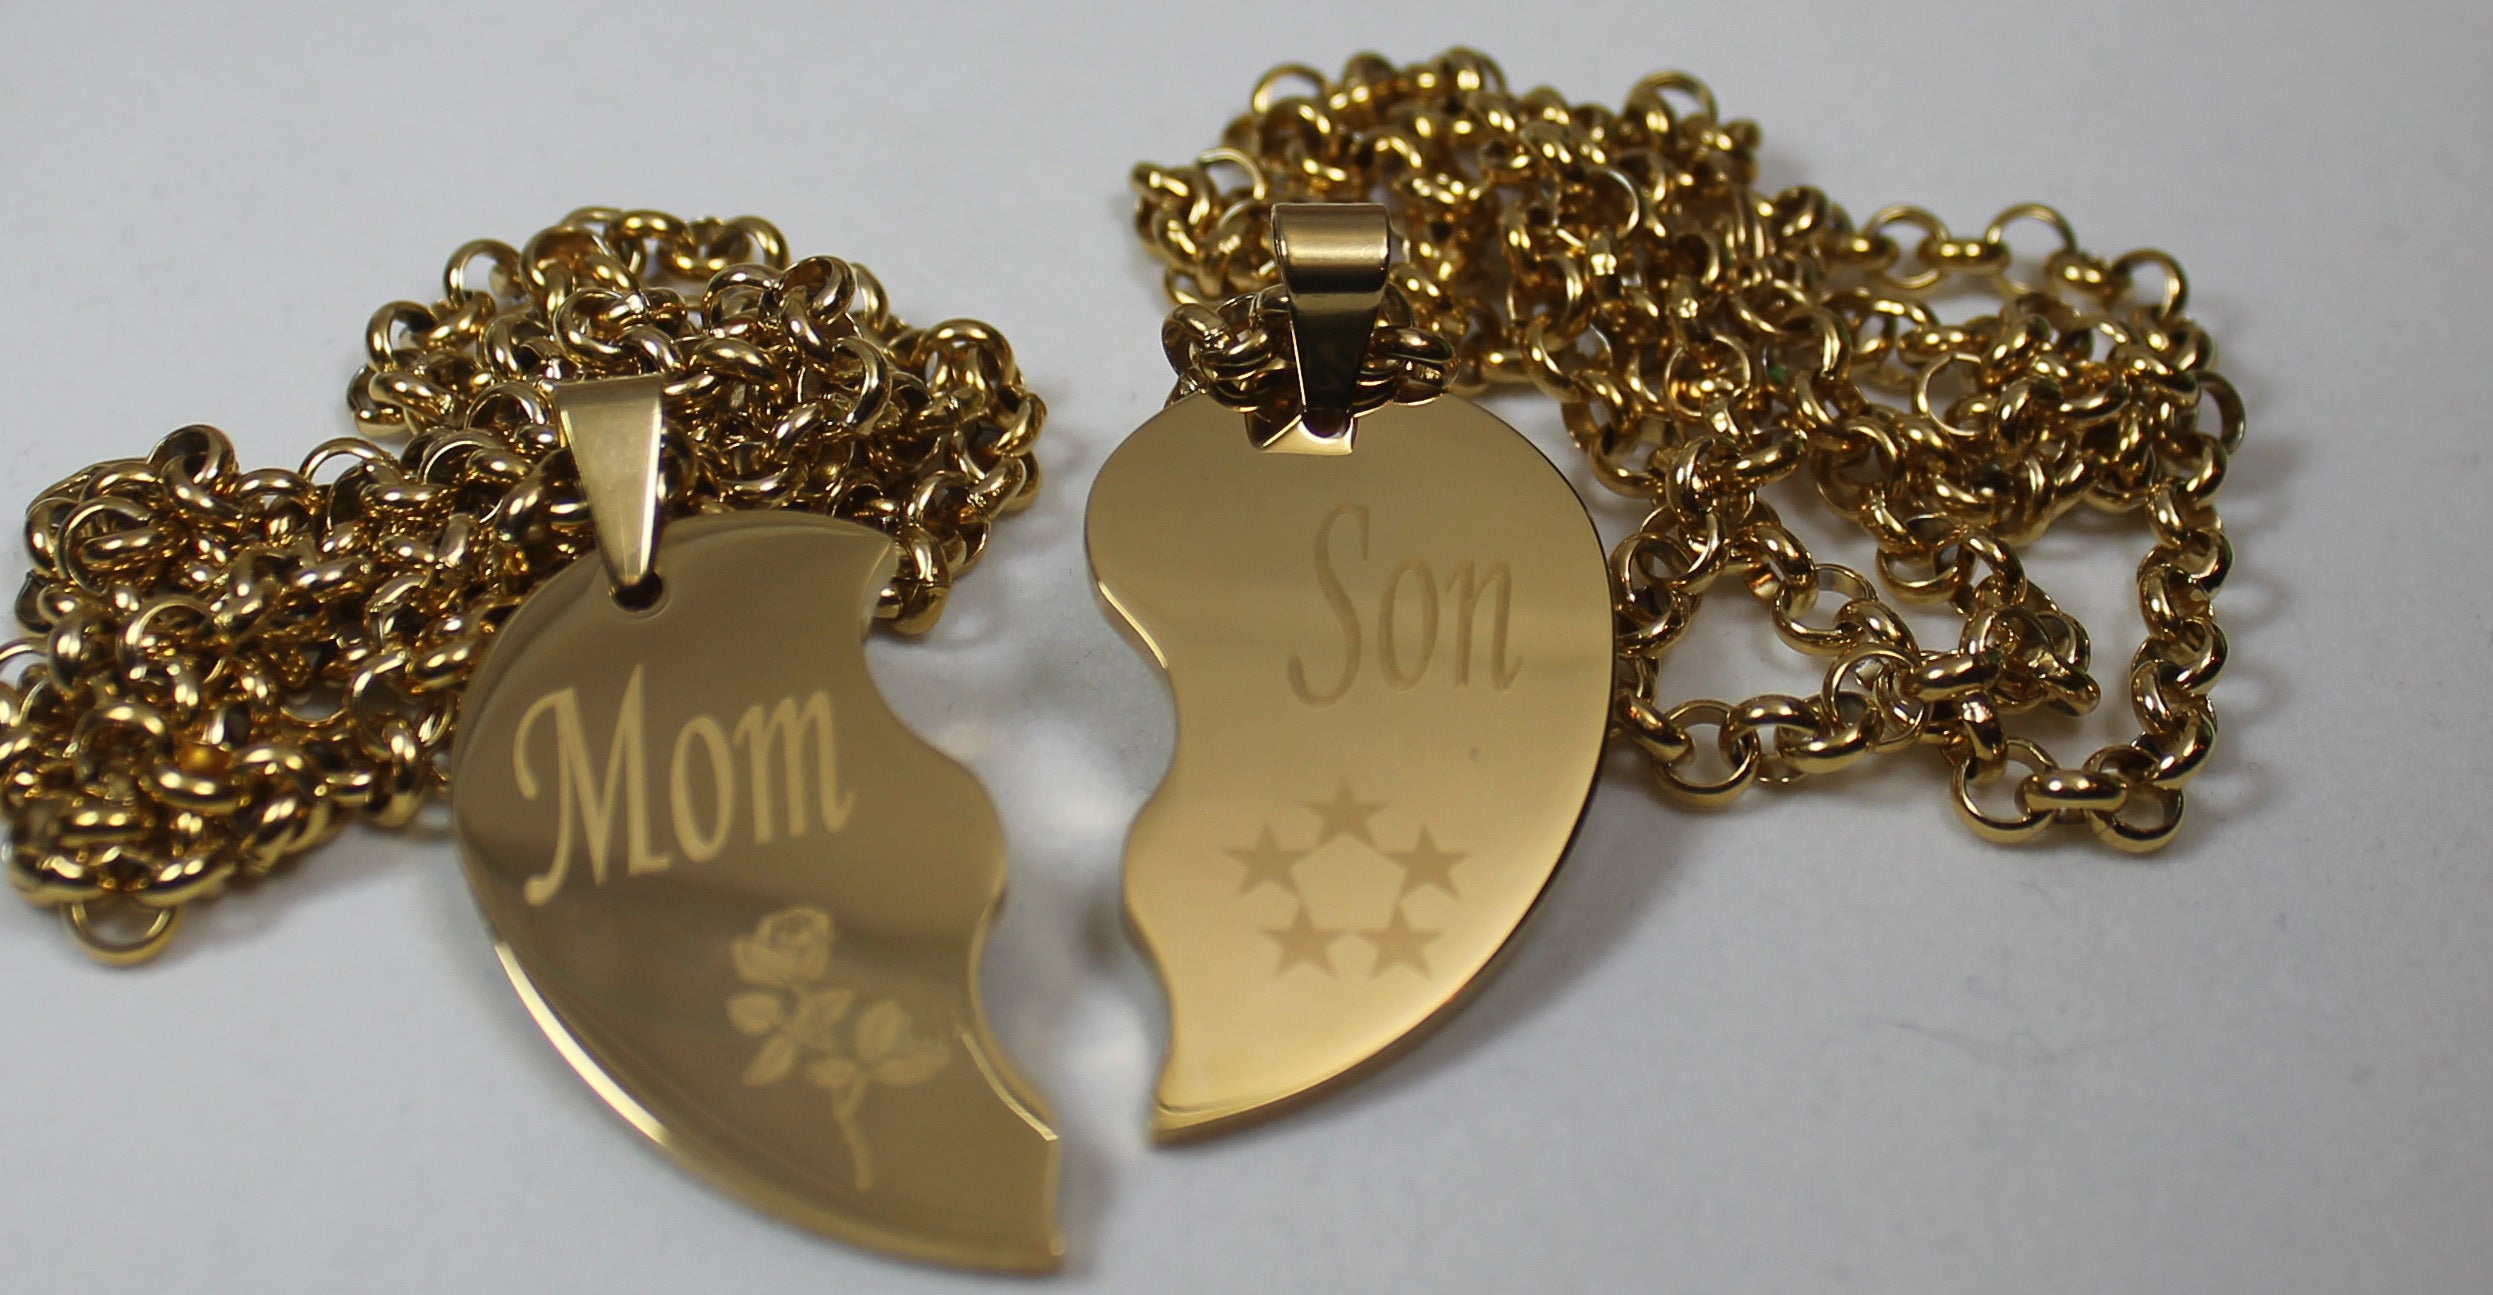 SPLIT HEART NECKLACE SOLID STAINLESS MOM SON IPG GOLD PLATED THICK PENDANTS - Samstagsandmore